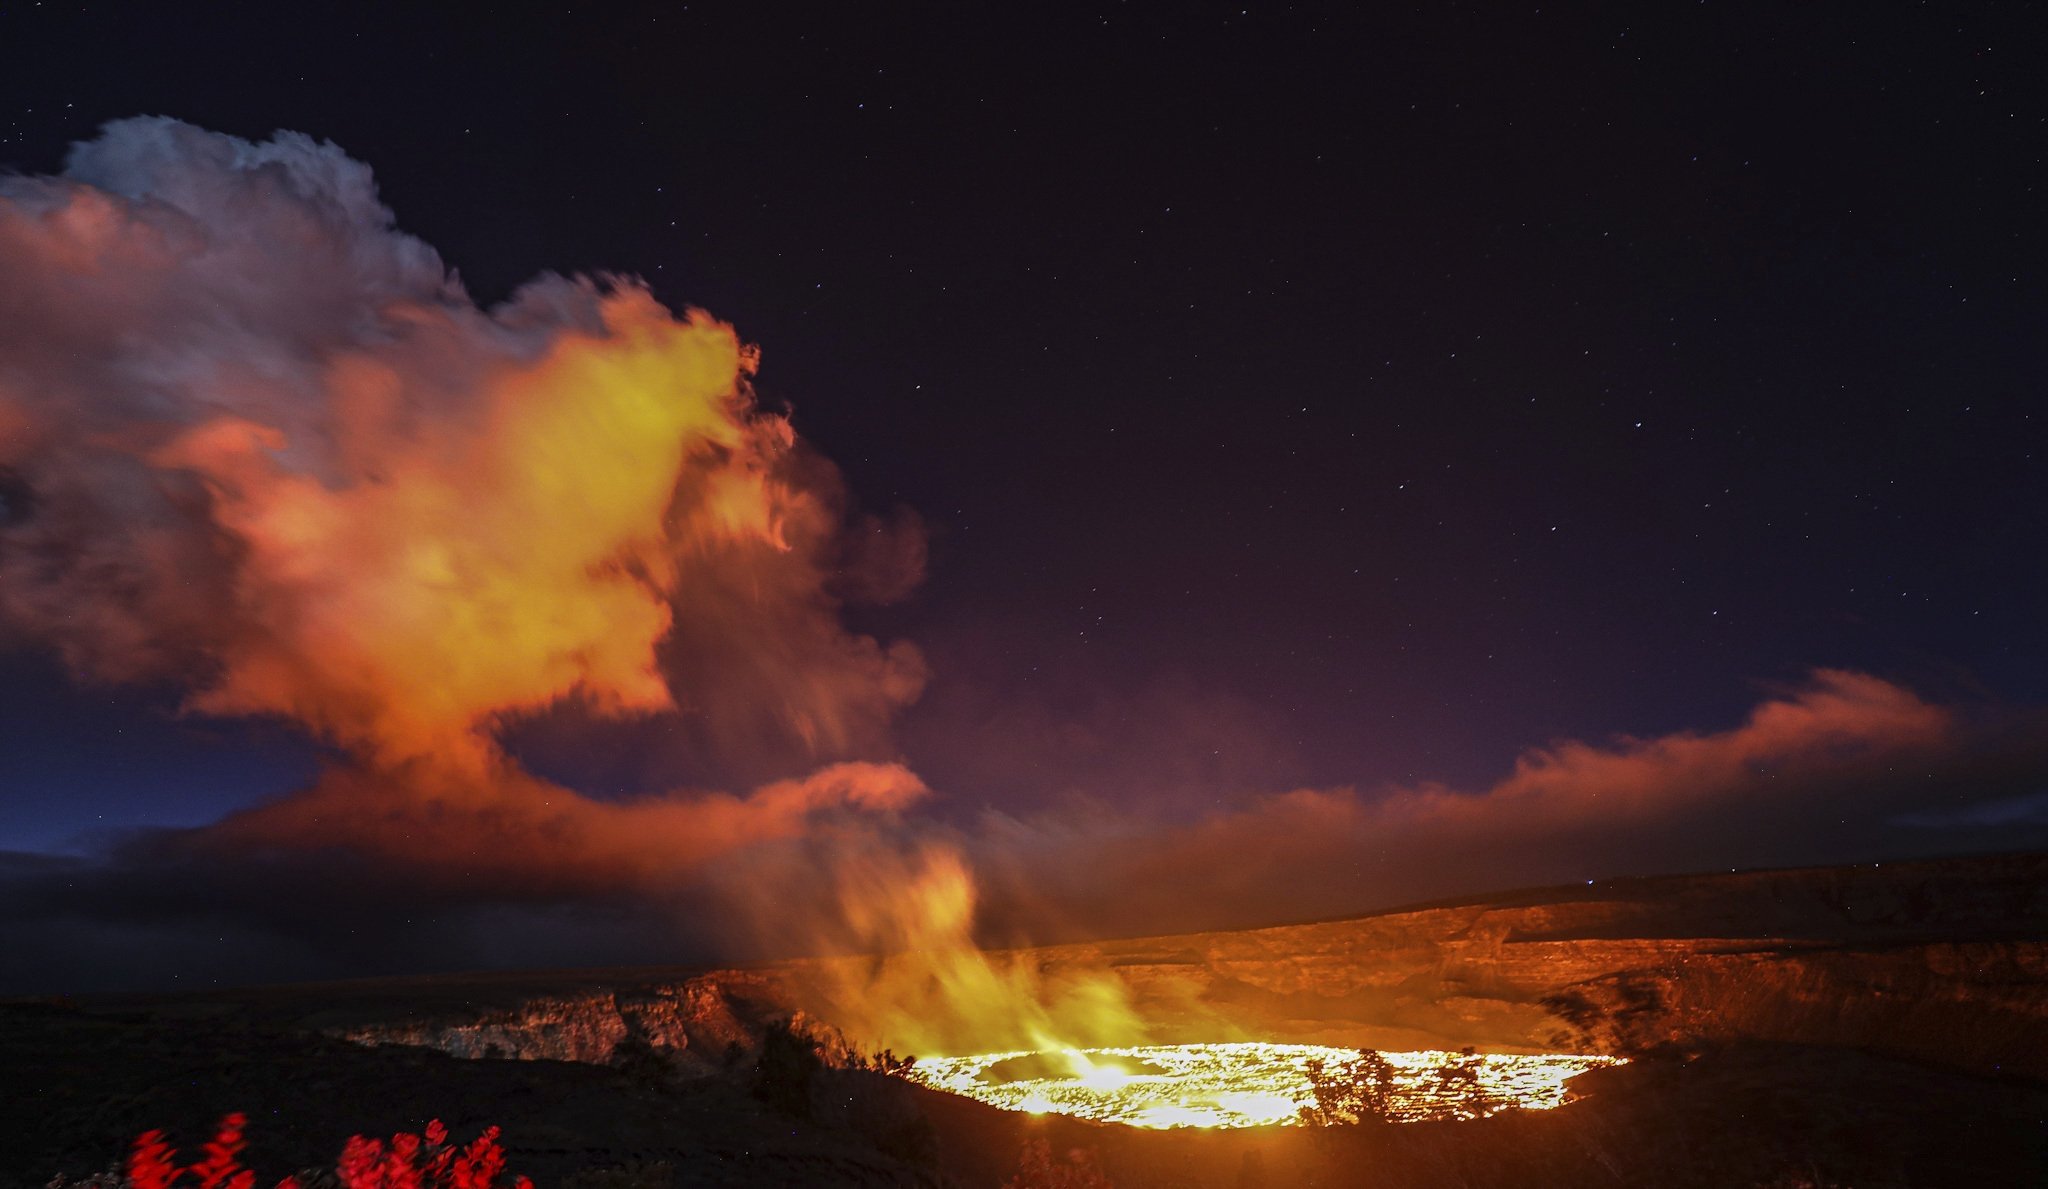 Hawaii's volcano erupts once again, creating a spectacular sight